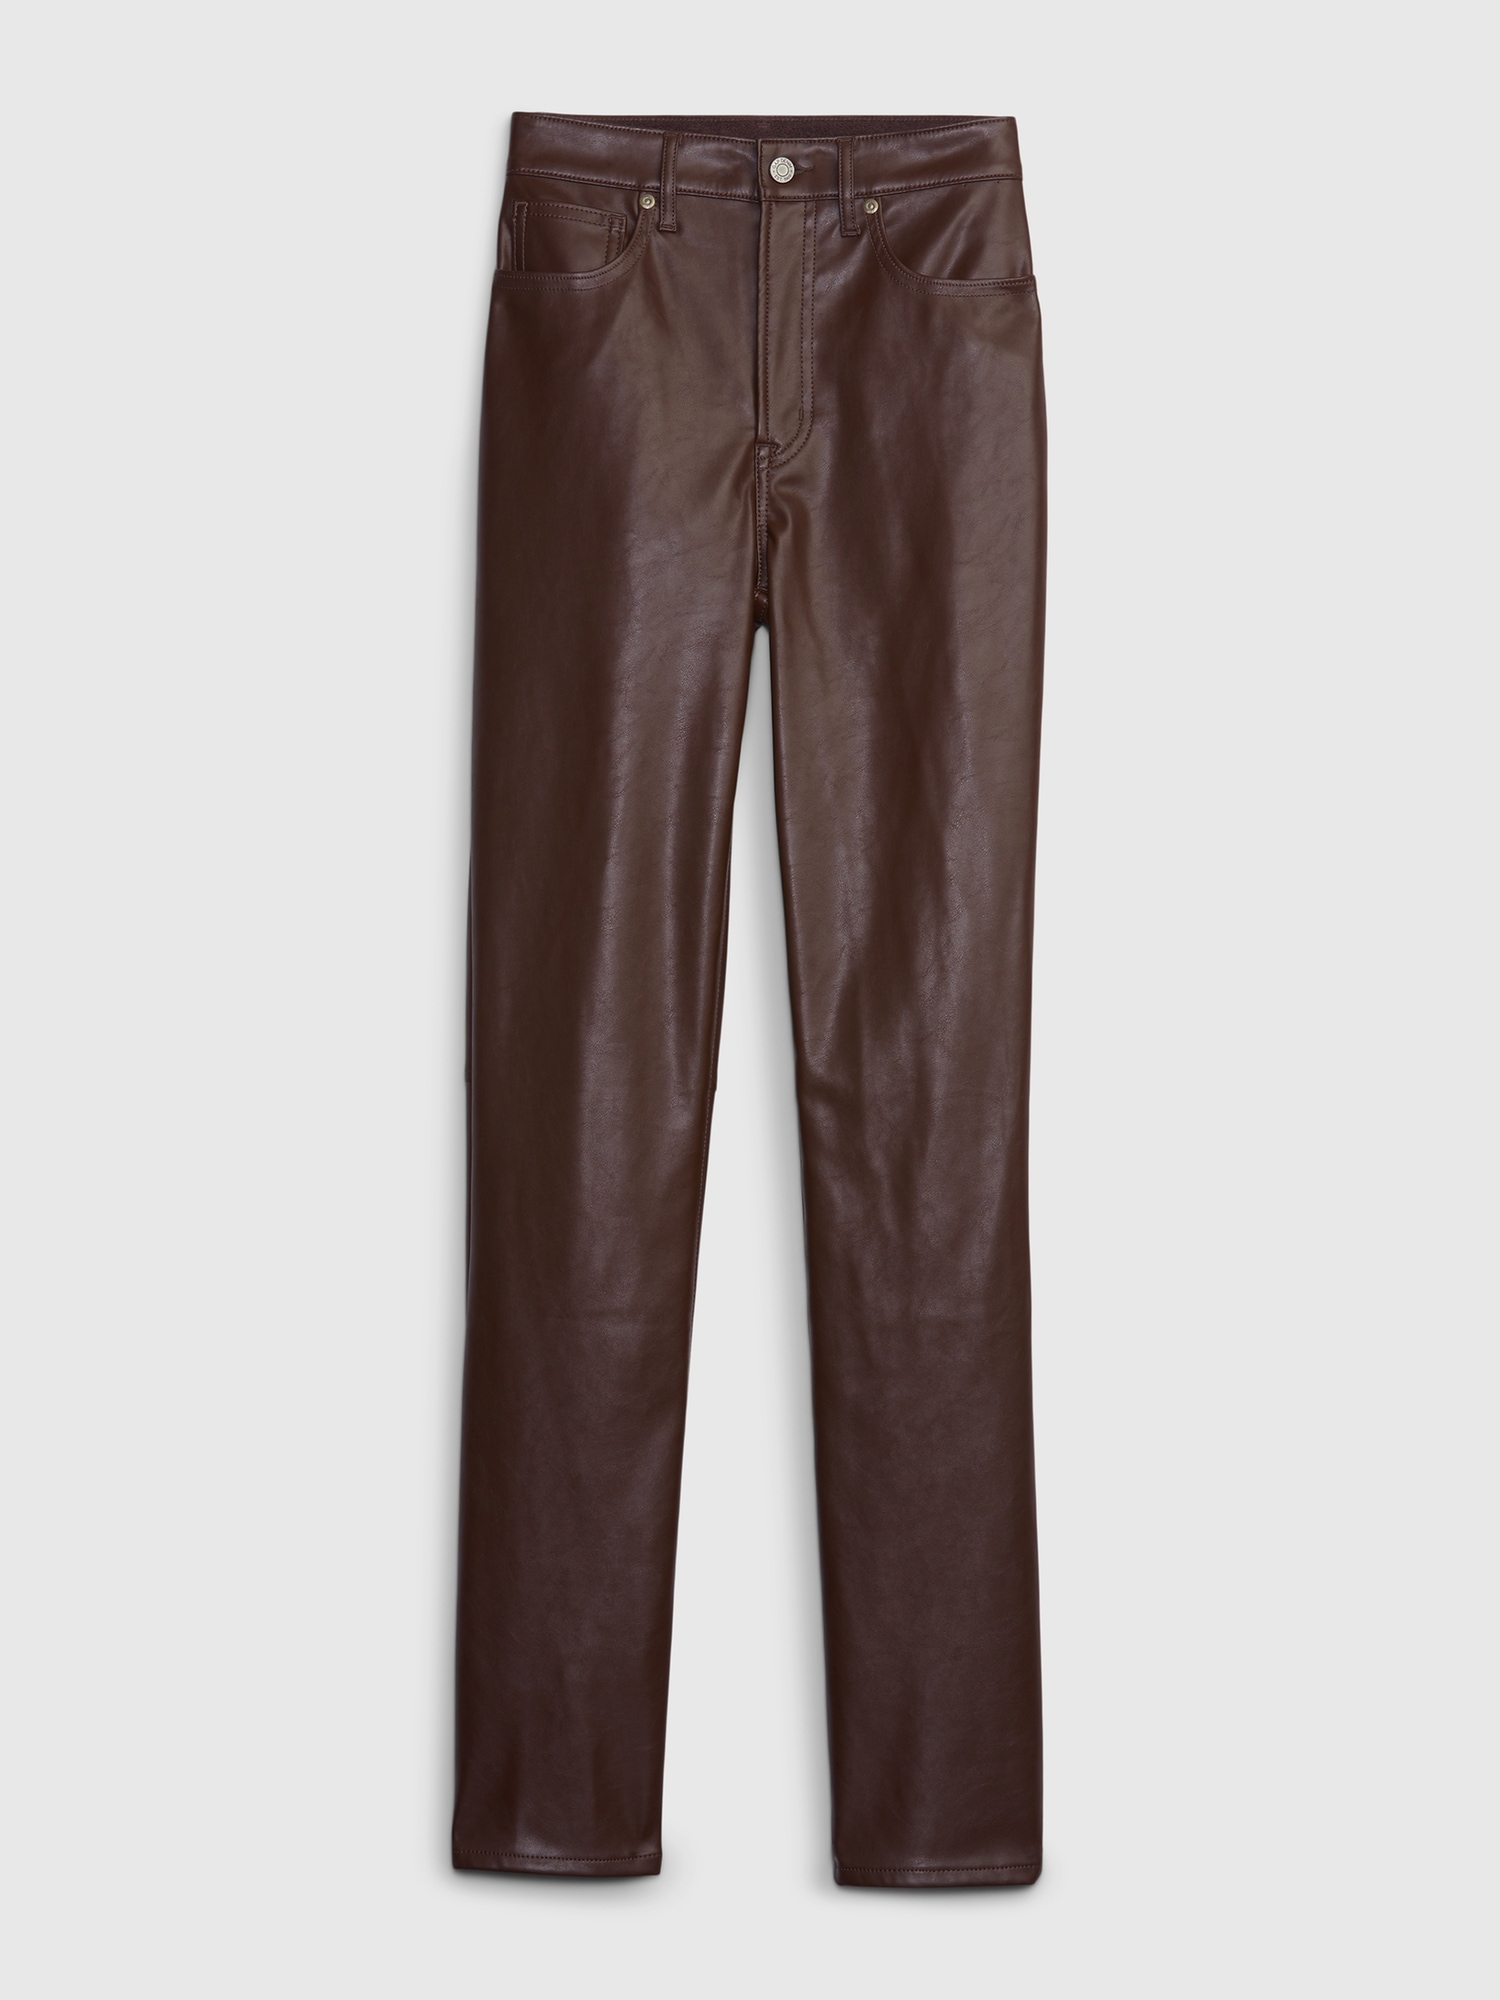 Front Seamed Skinny Faux Leather Pants Leather Pants Brown Leather